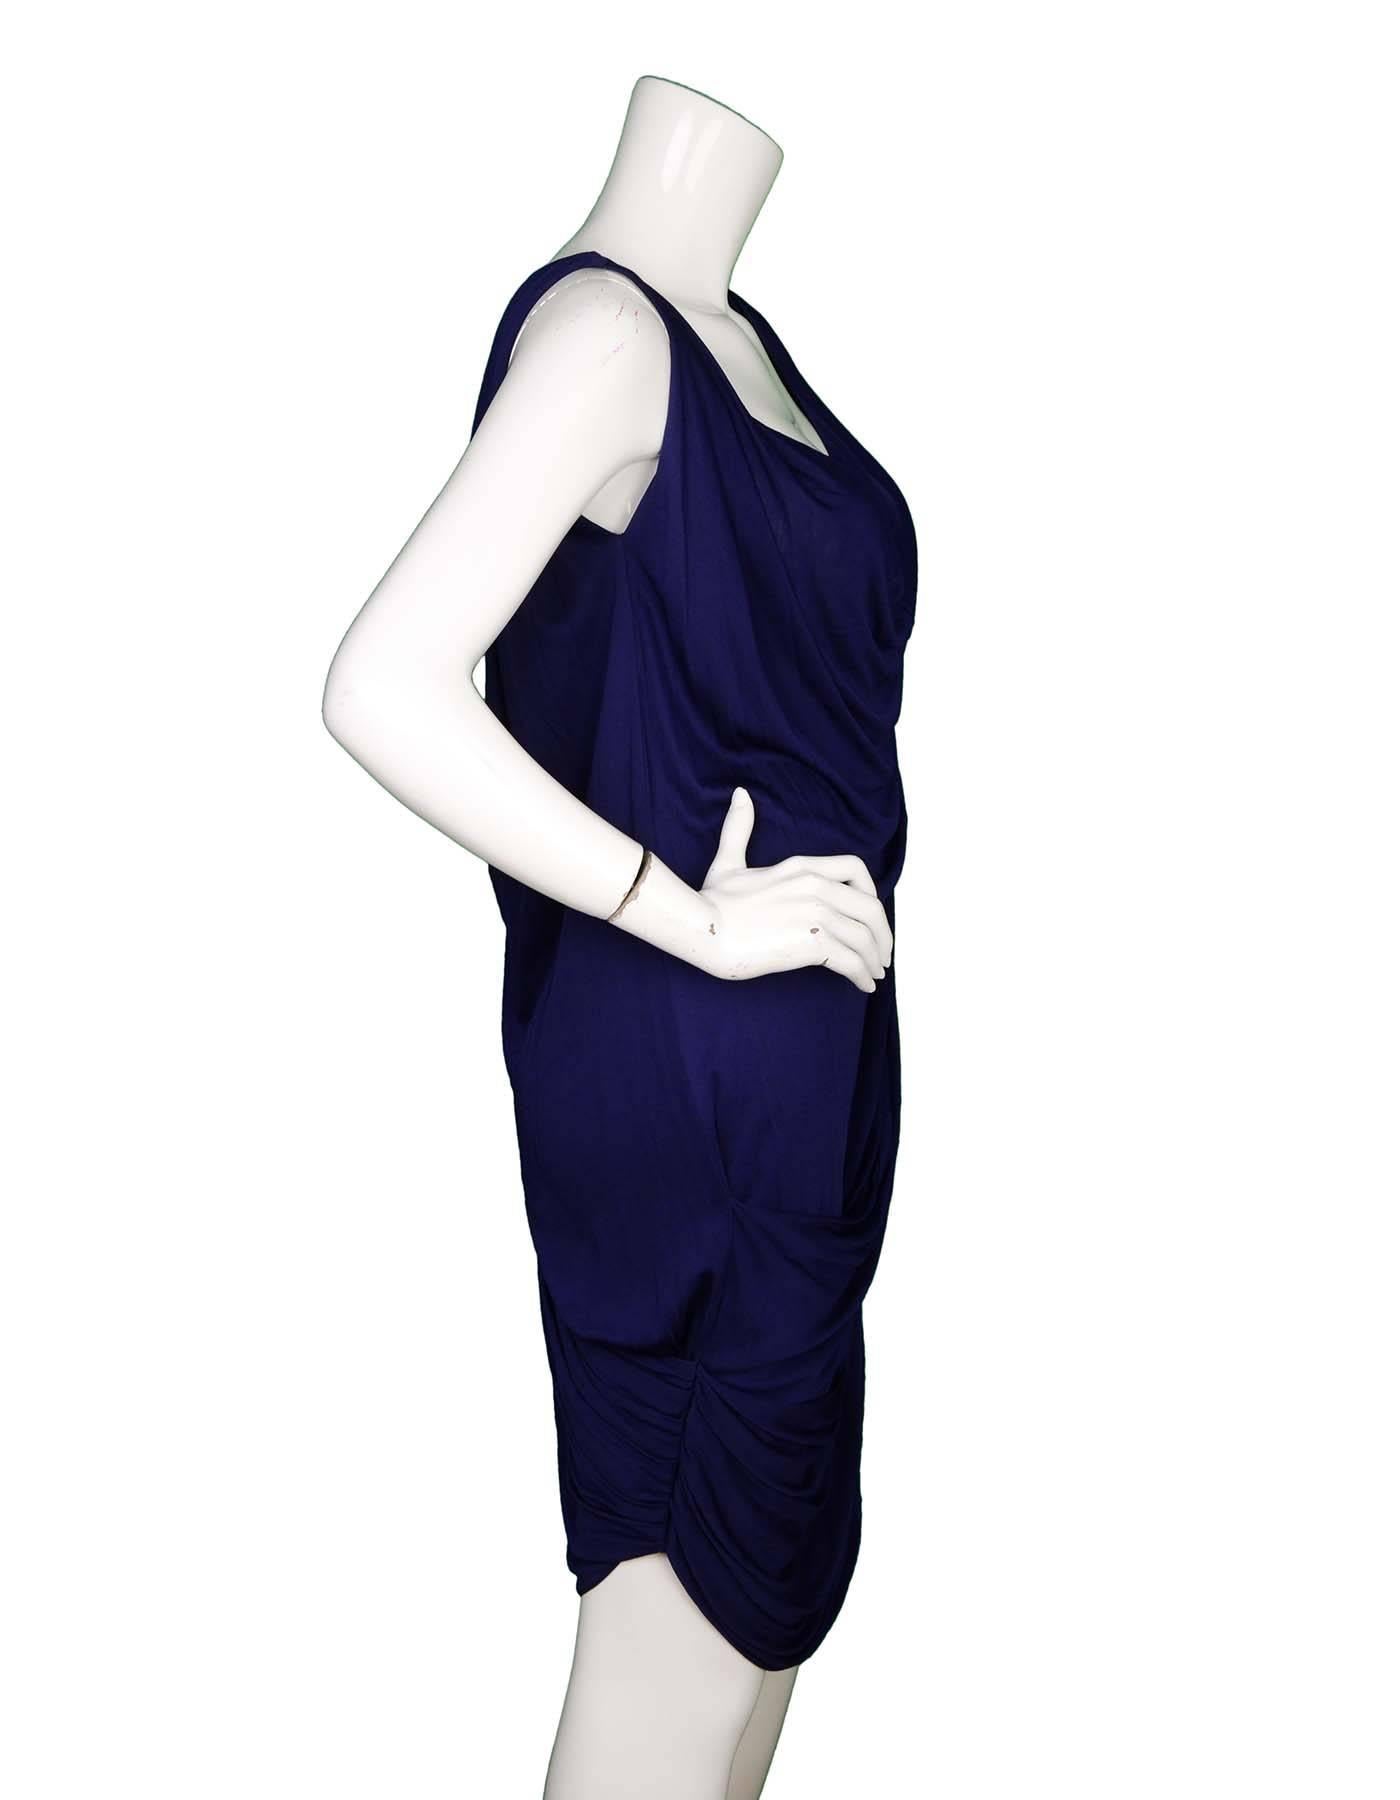 Vionnet Blue Silk Draped Dress Sz 40

Made In: Italy
Color: Blue
Composition: 100% Silk
Lining: None
Closure/Opening: None
Overall Condition: Excellent pre-owned condition

Marked Size: 40
Bust: 30"
Waist: 32"
Hips: